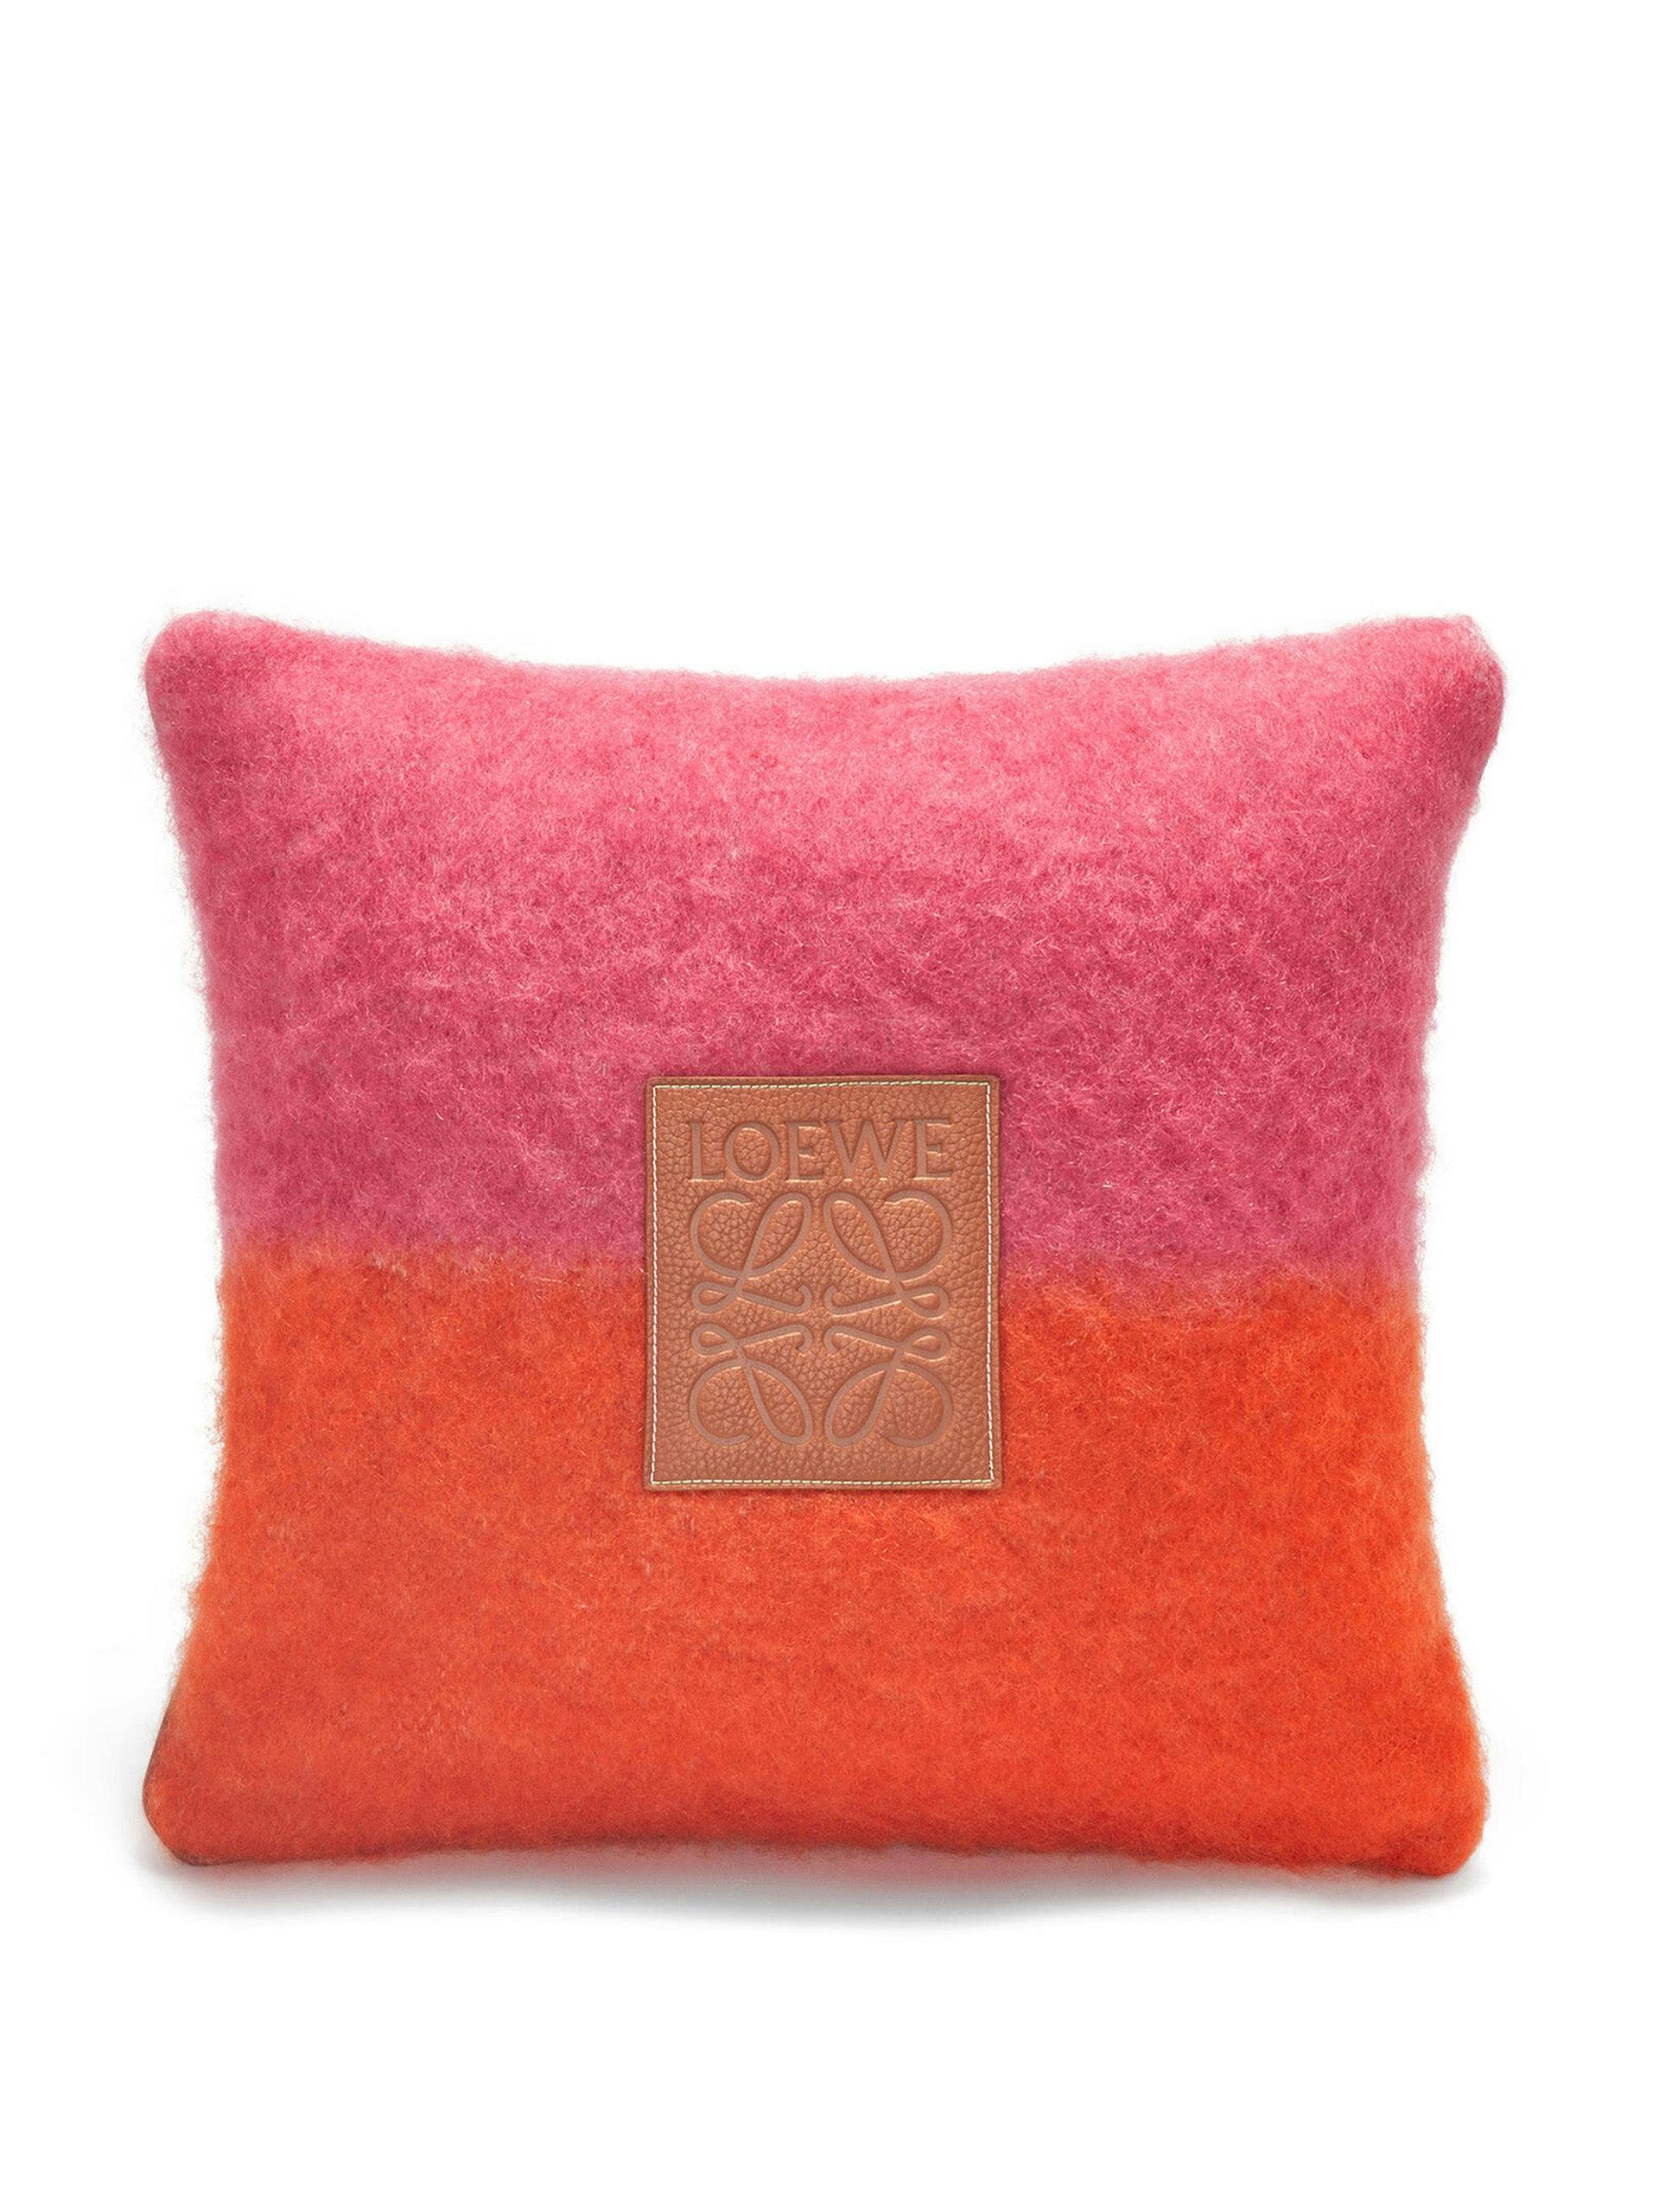 Pink and orange mohair cushion